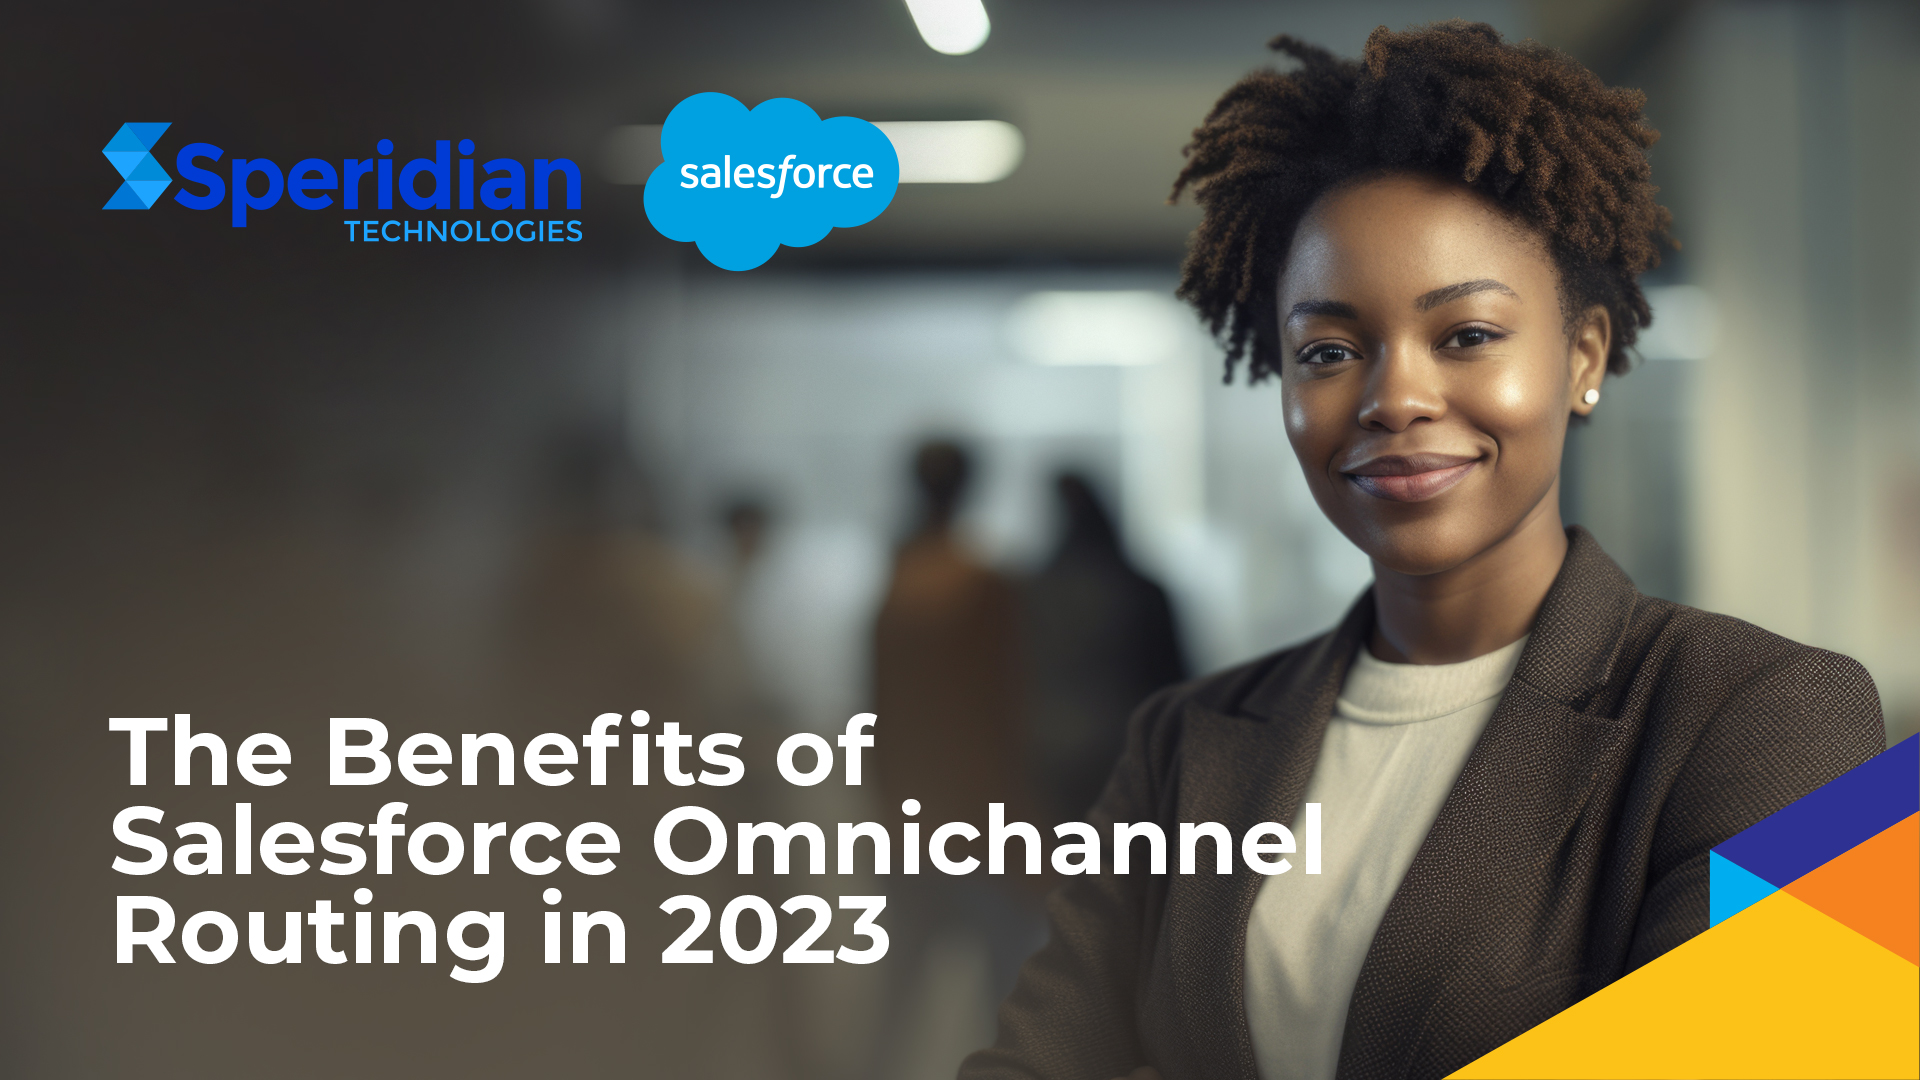 The Benefits of Salesforce Omnichannel Routing in 2023